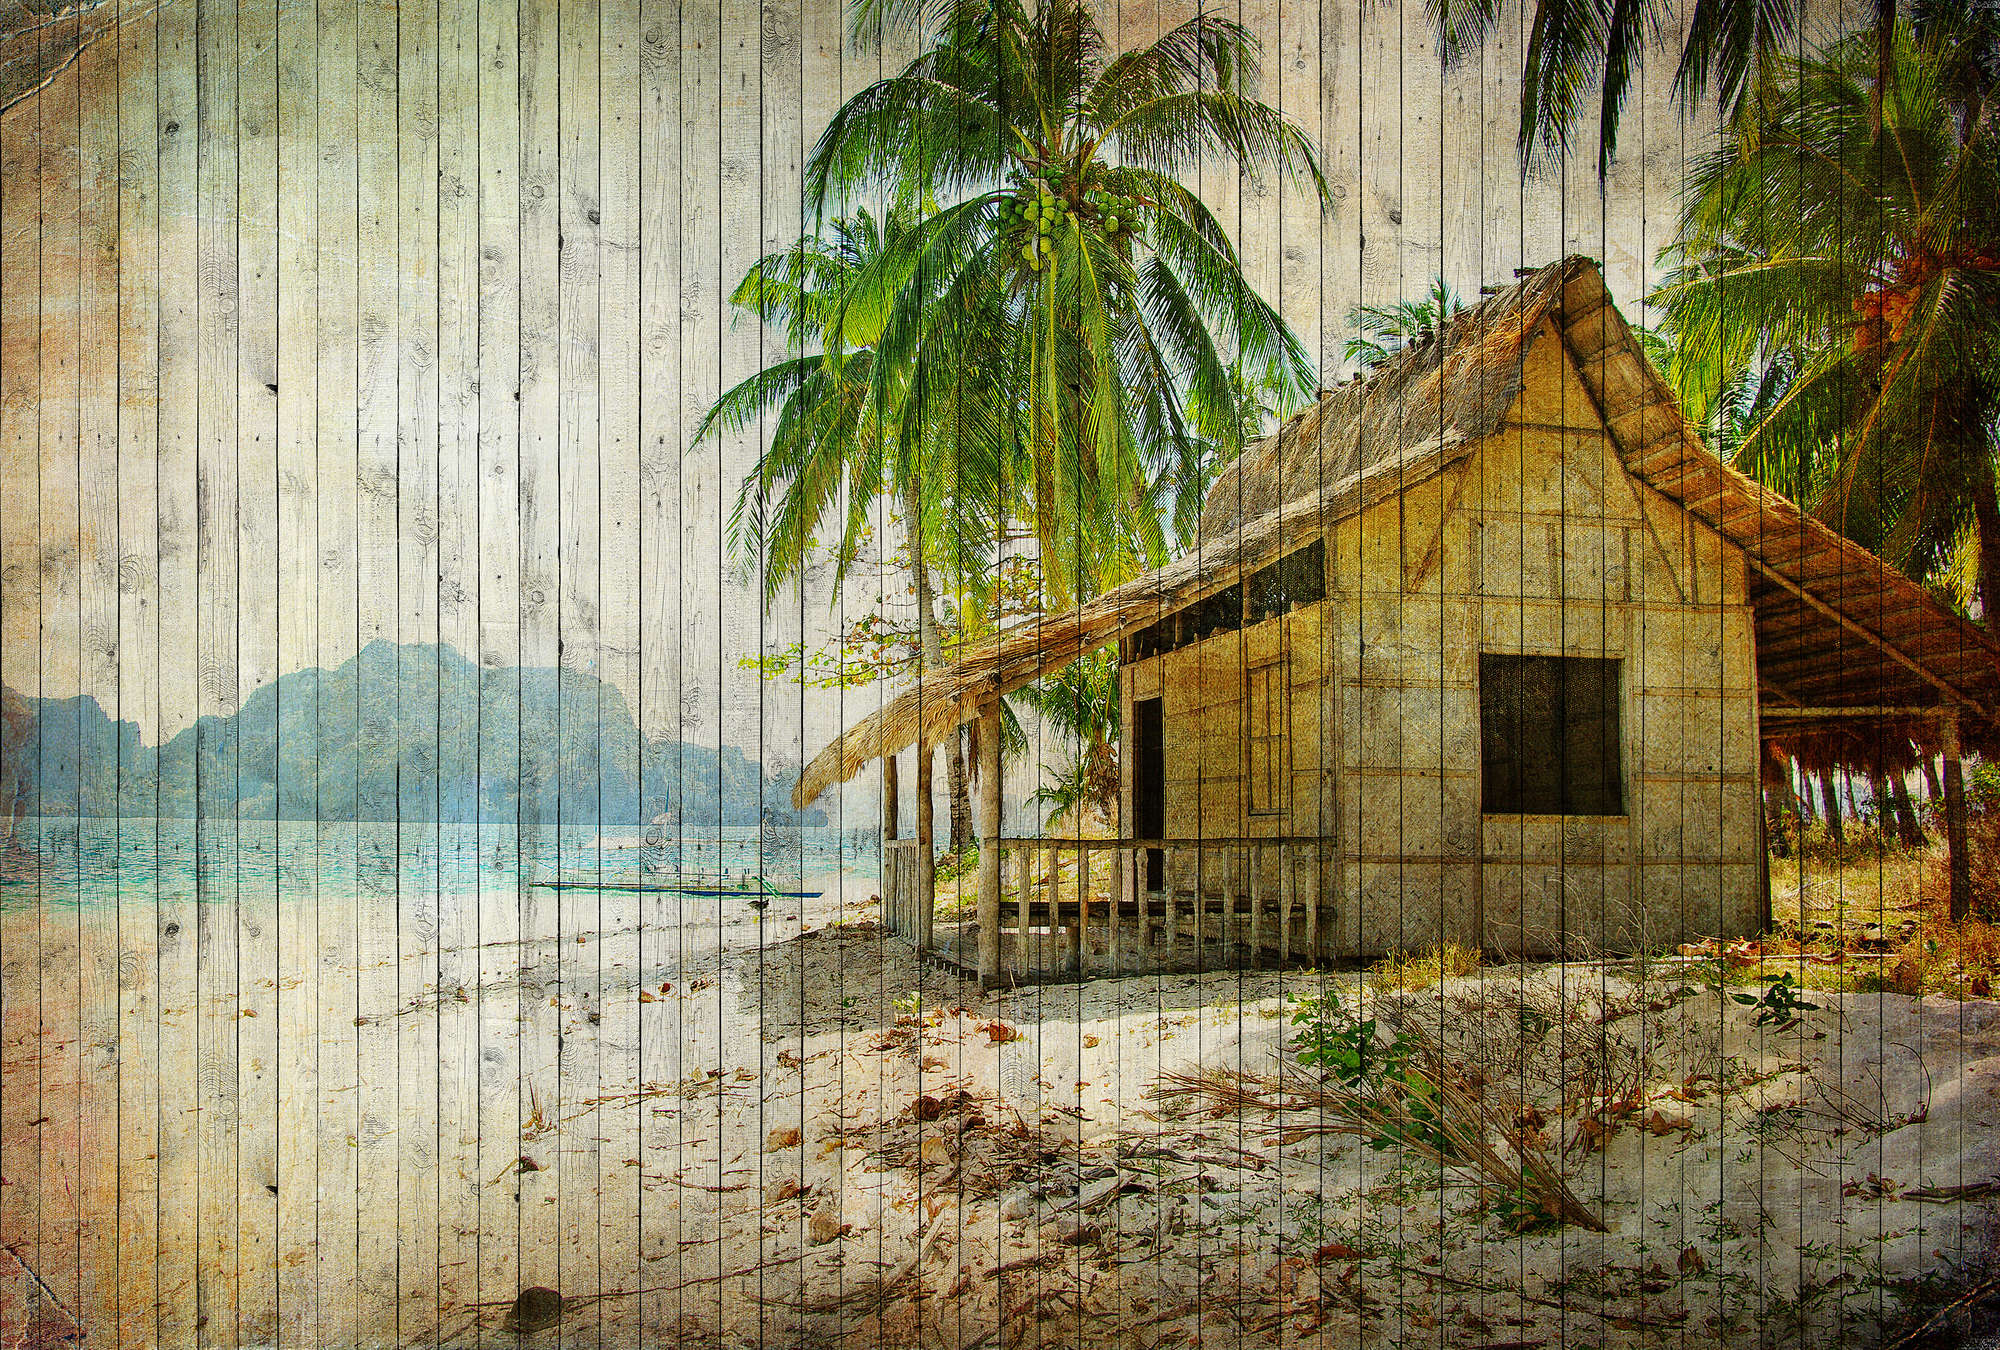             Tahiti 1 - South Seas beach wallpaper with board optics in wood panels - beige, blue | mother-of-pearl smooth fleece
        